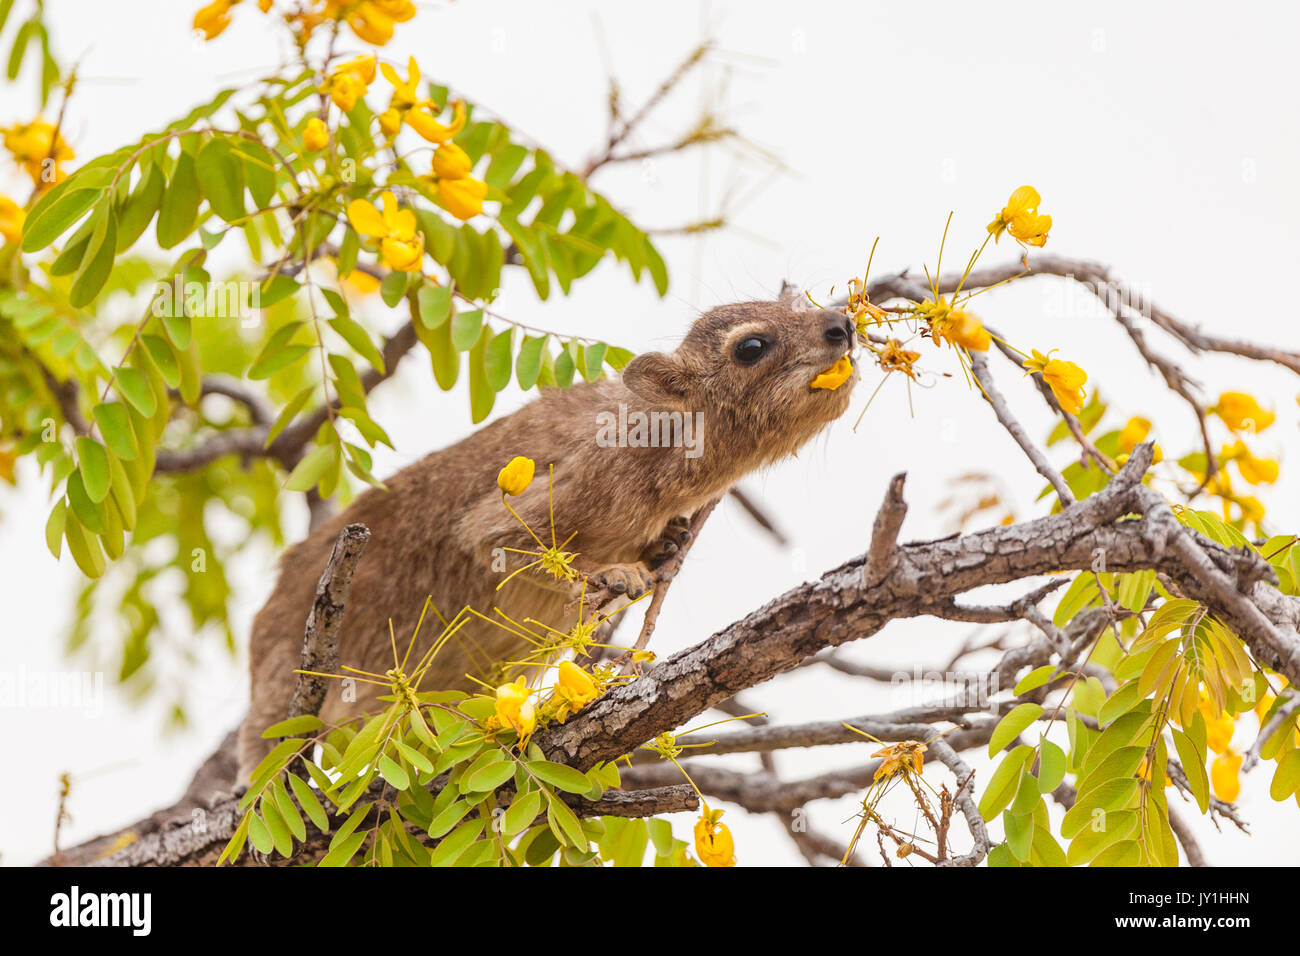 A Yellow Spotted Rock Hyrax seen In Zimbabwe's Hwange National Park Stock Photo